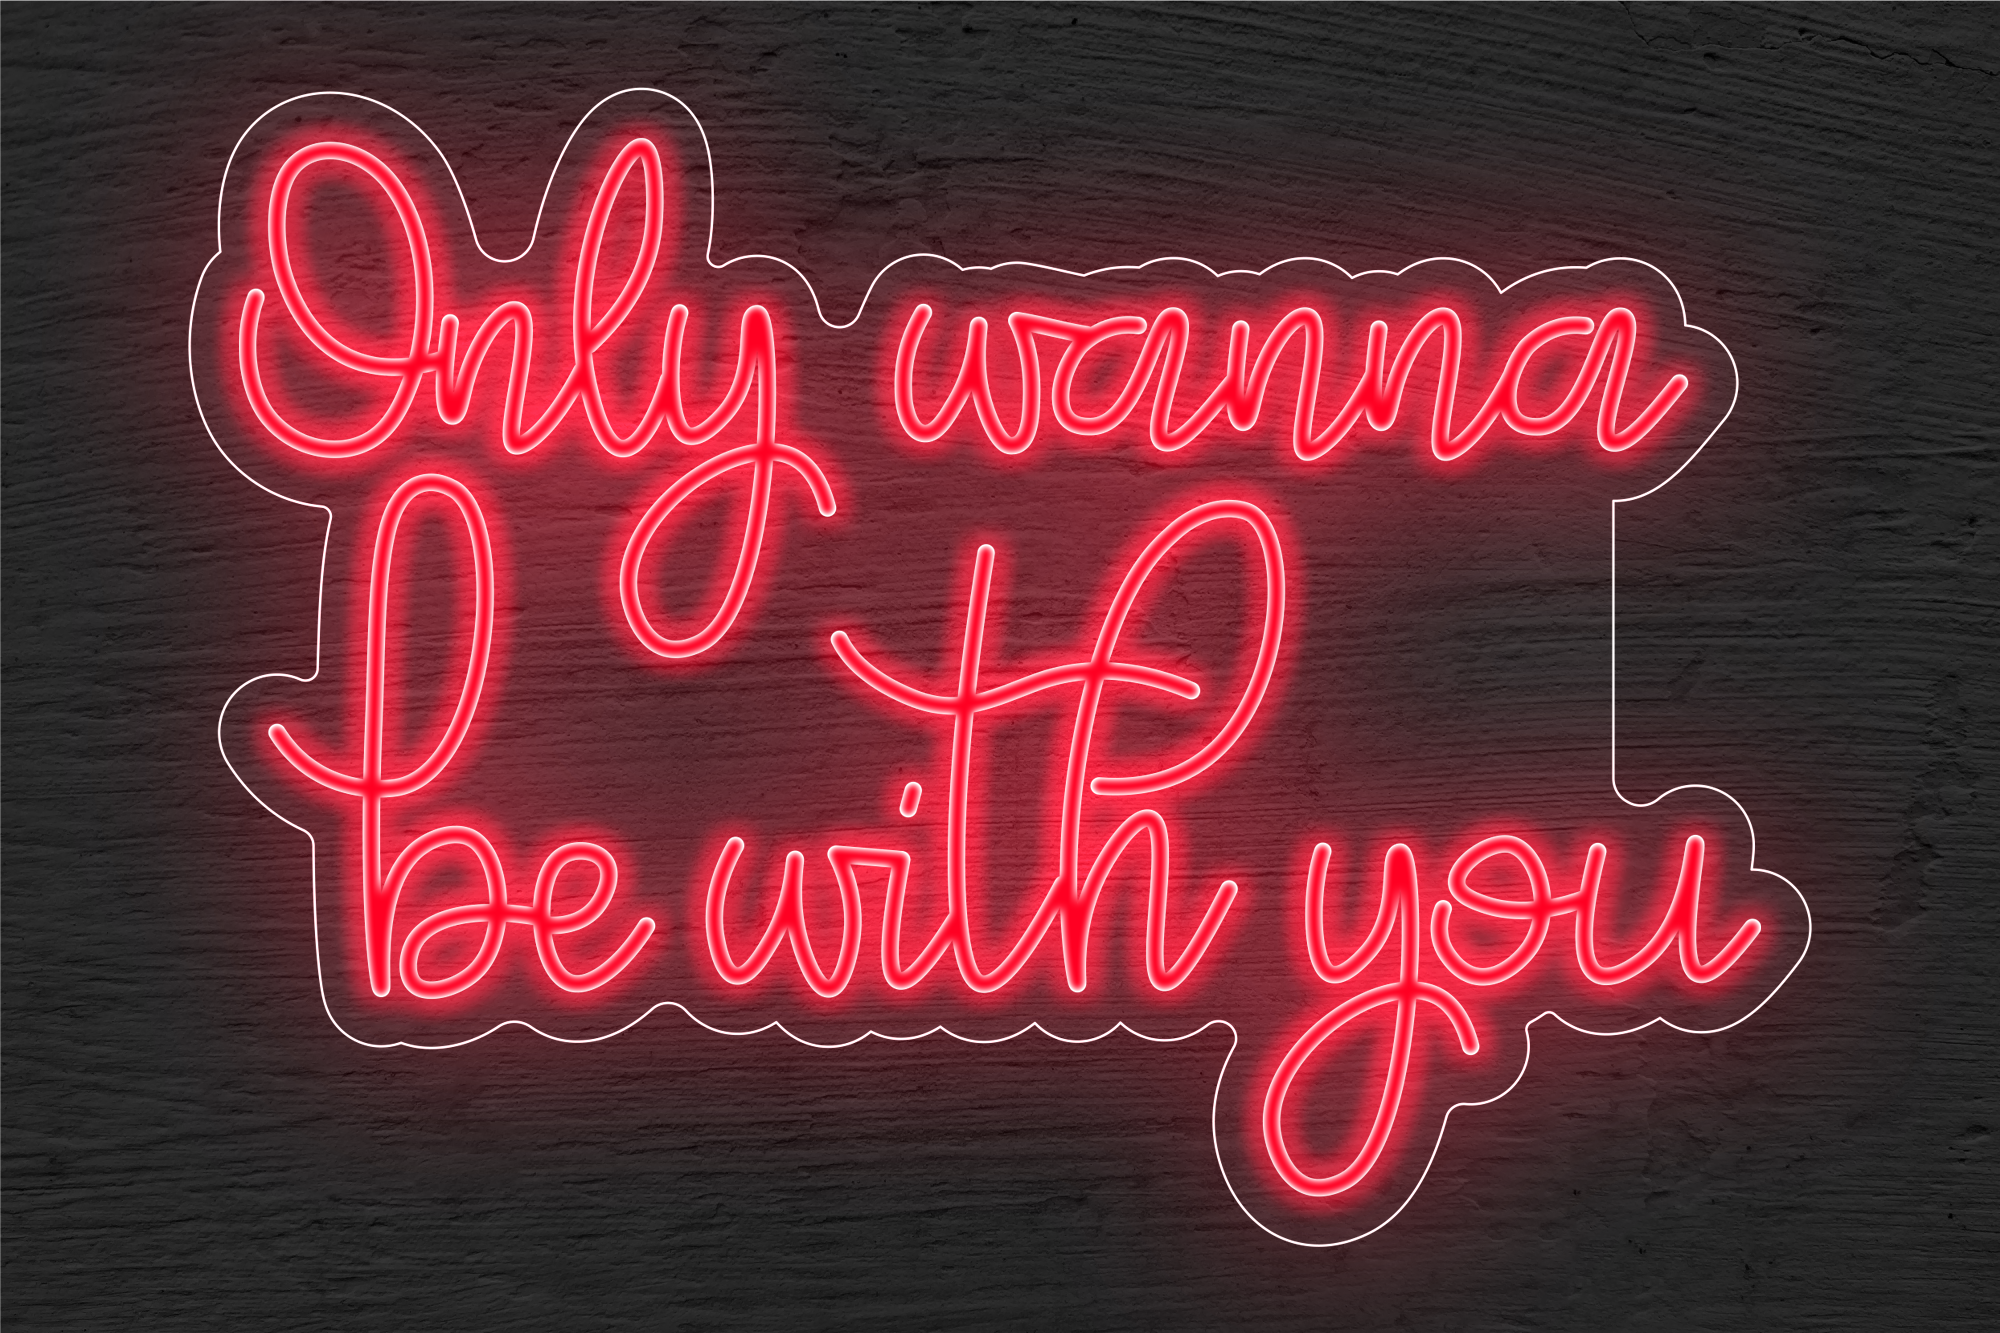 "Only wanna be with you" LED Neon Sign